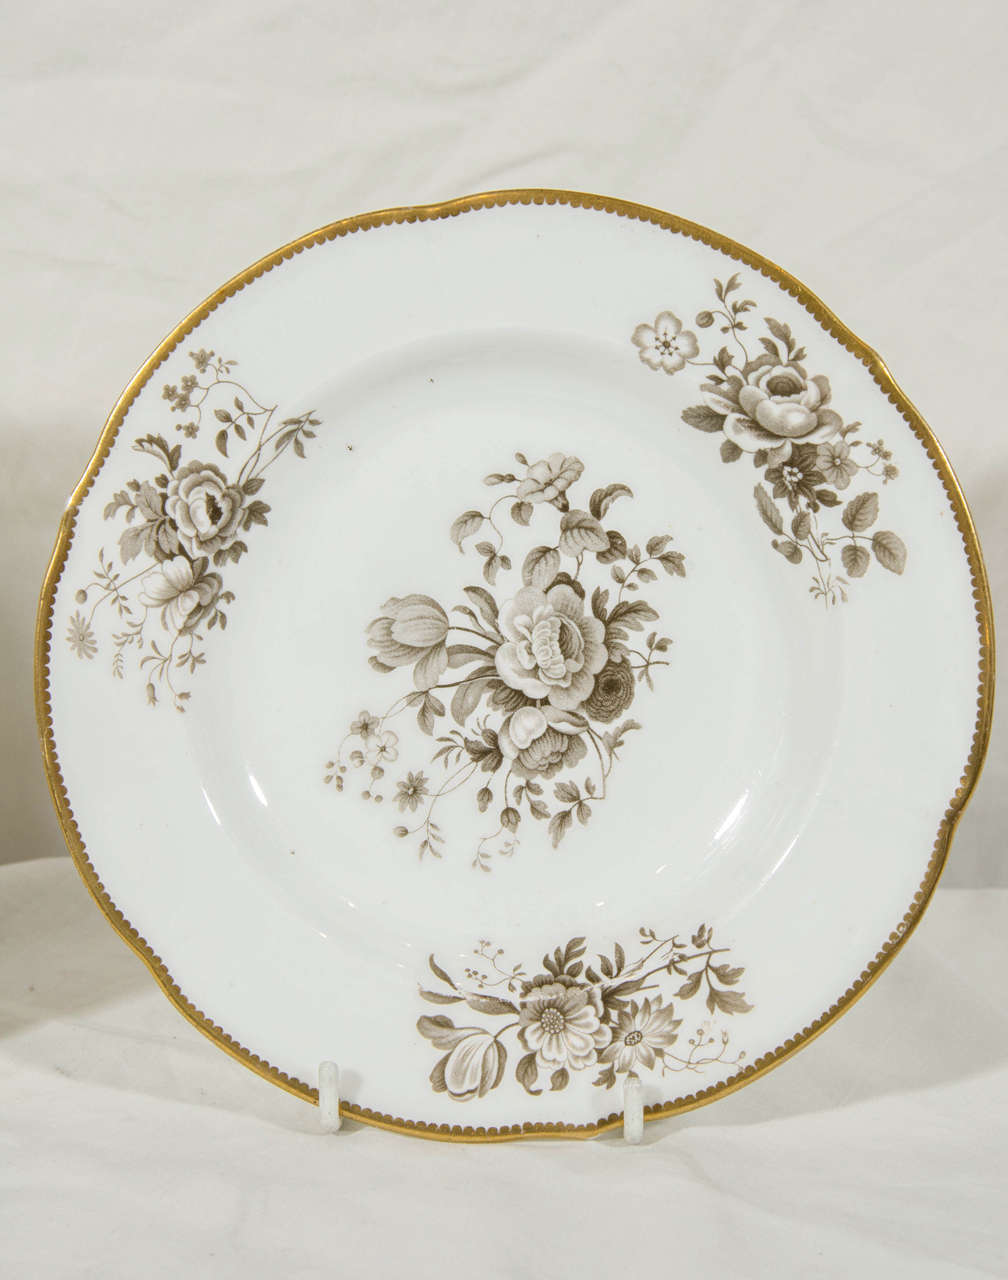 This set of nine Minton dishes are decorated with bouquets of spring flowers painted in grisaille. This design was quite popular in the Early Victorian Period. Each dish has a beautifully gilded, softly lobed border.